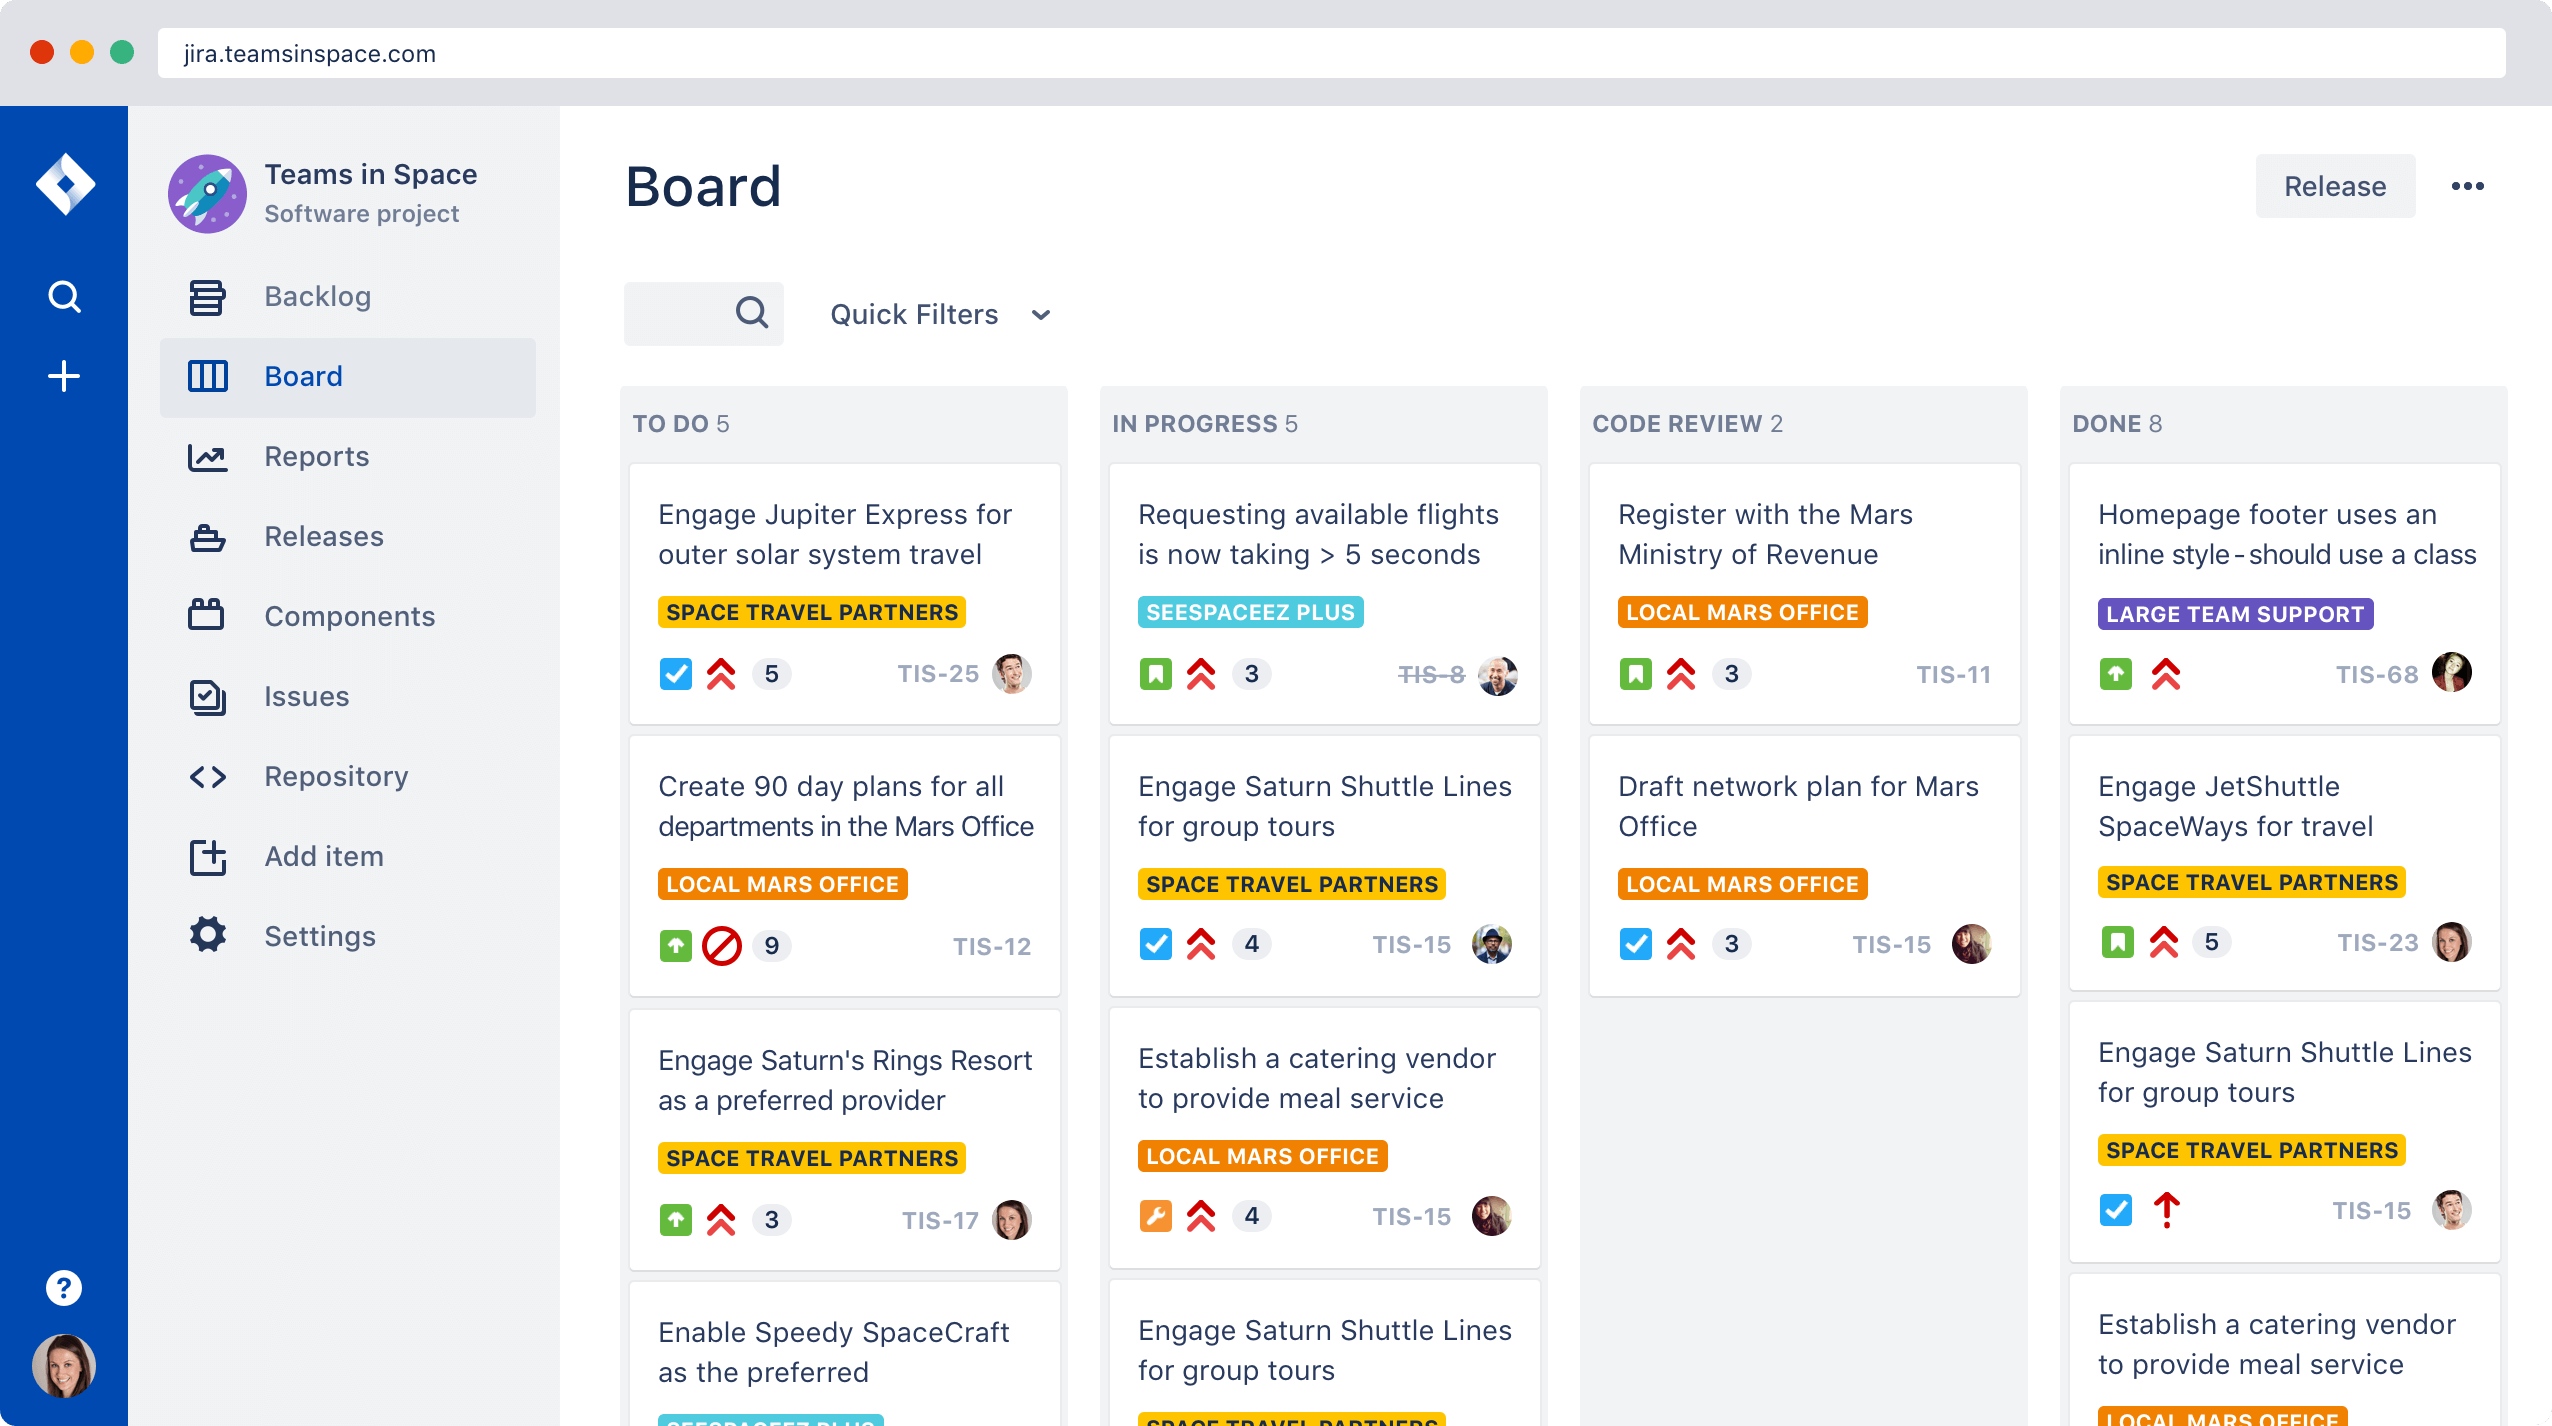 Jira was created as a specific tool for software developers (*image by [Mani](https://dribbble.com/noptar){ rel="nofollow" .default-md}*)